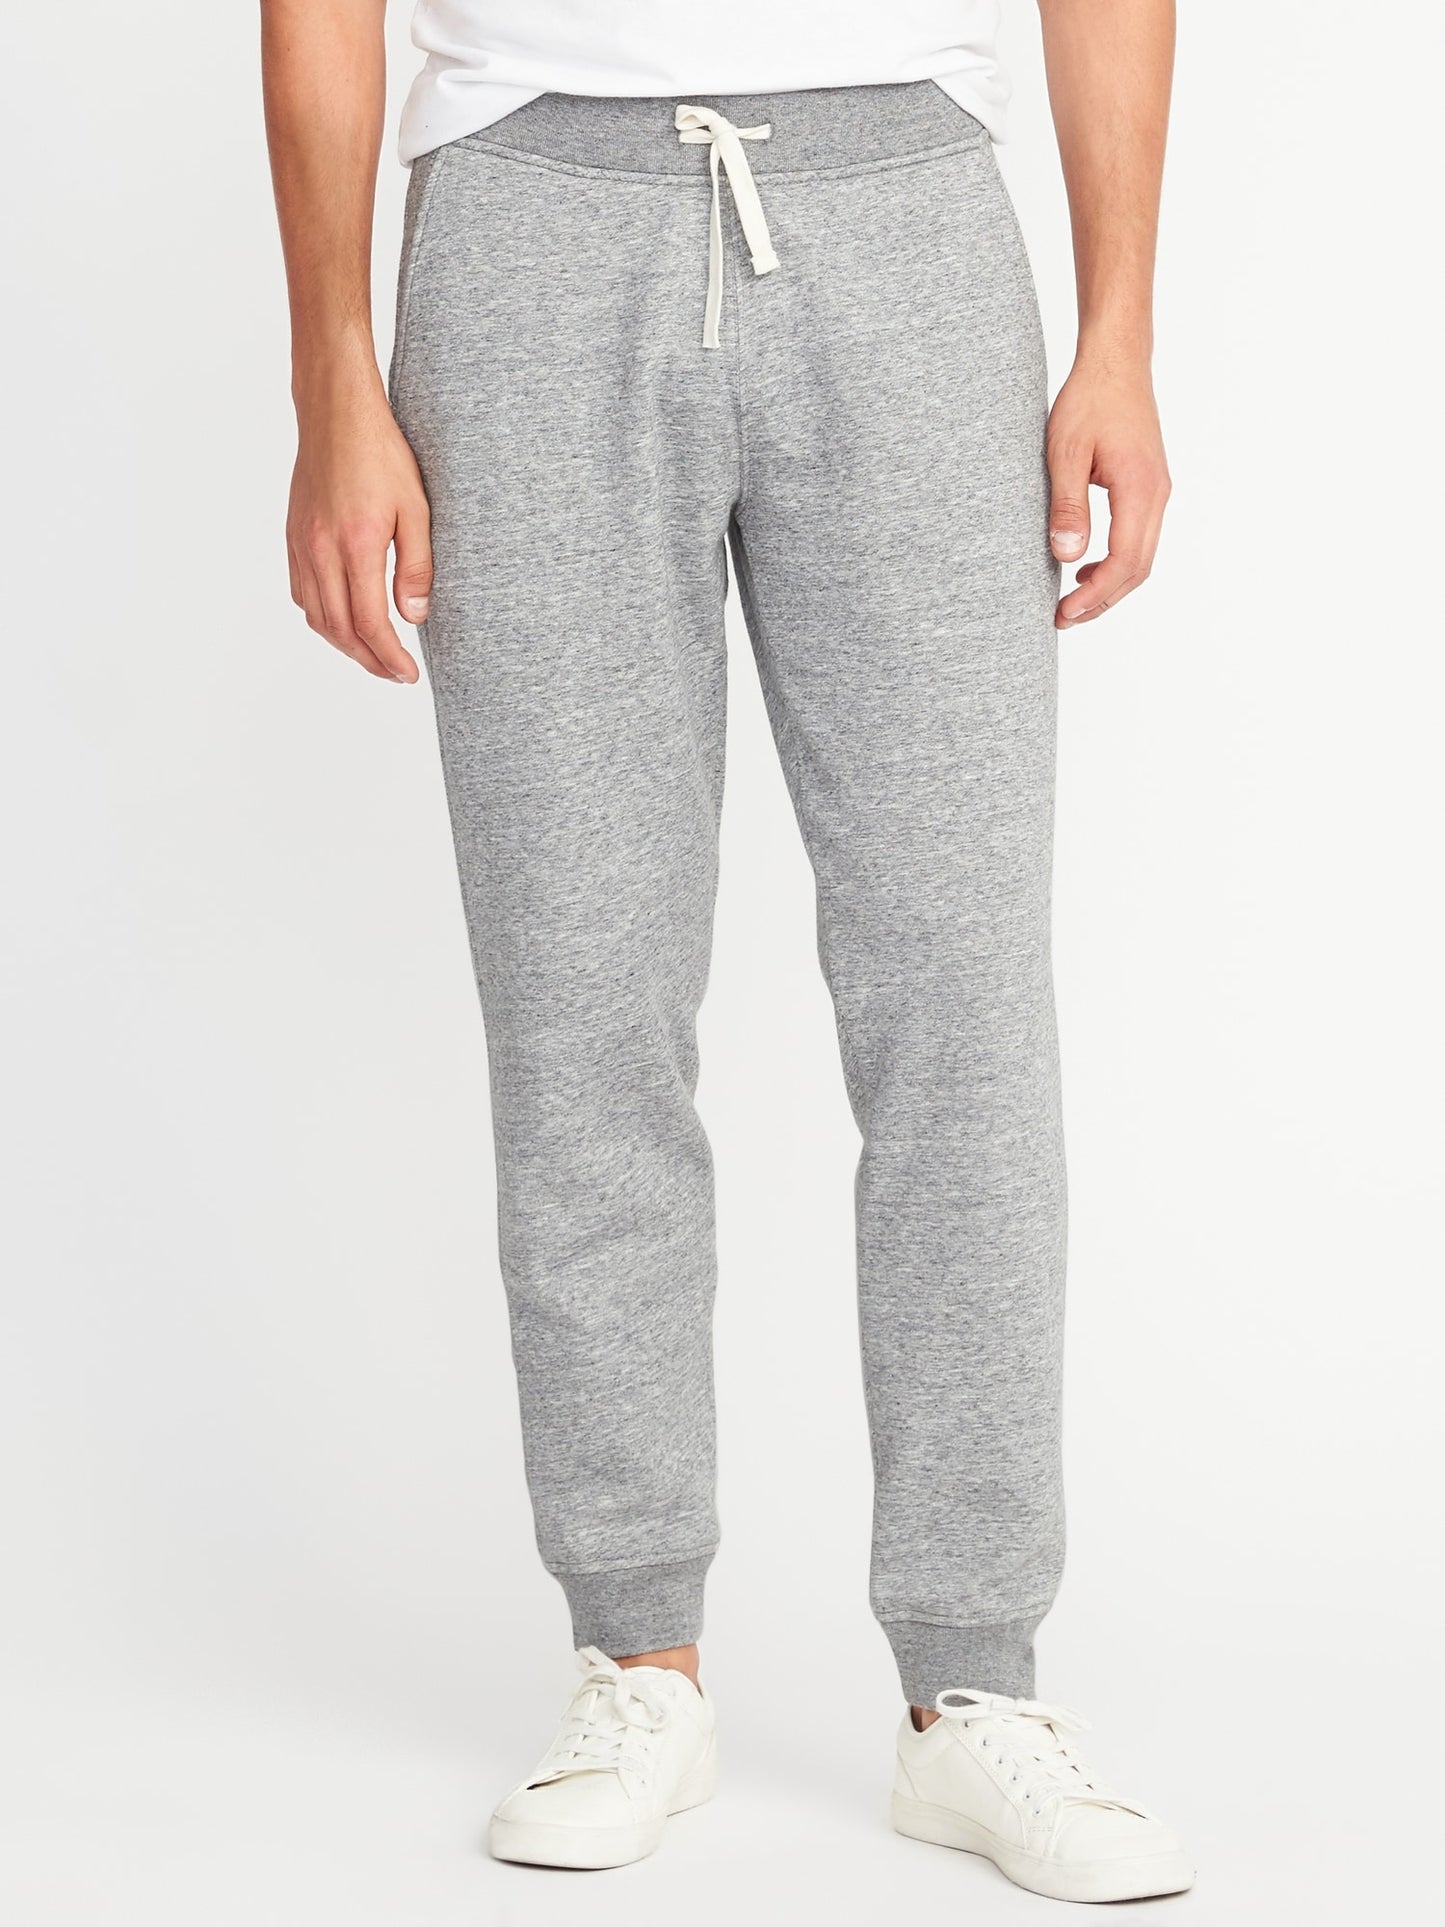 Old Navy Tapered Street Jogger Sweatpants for Men